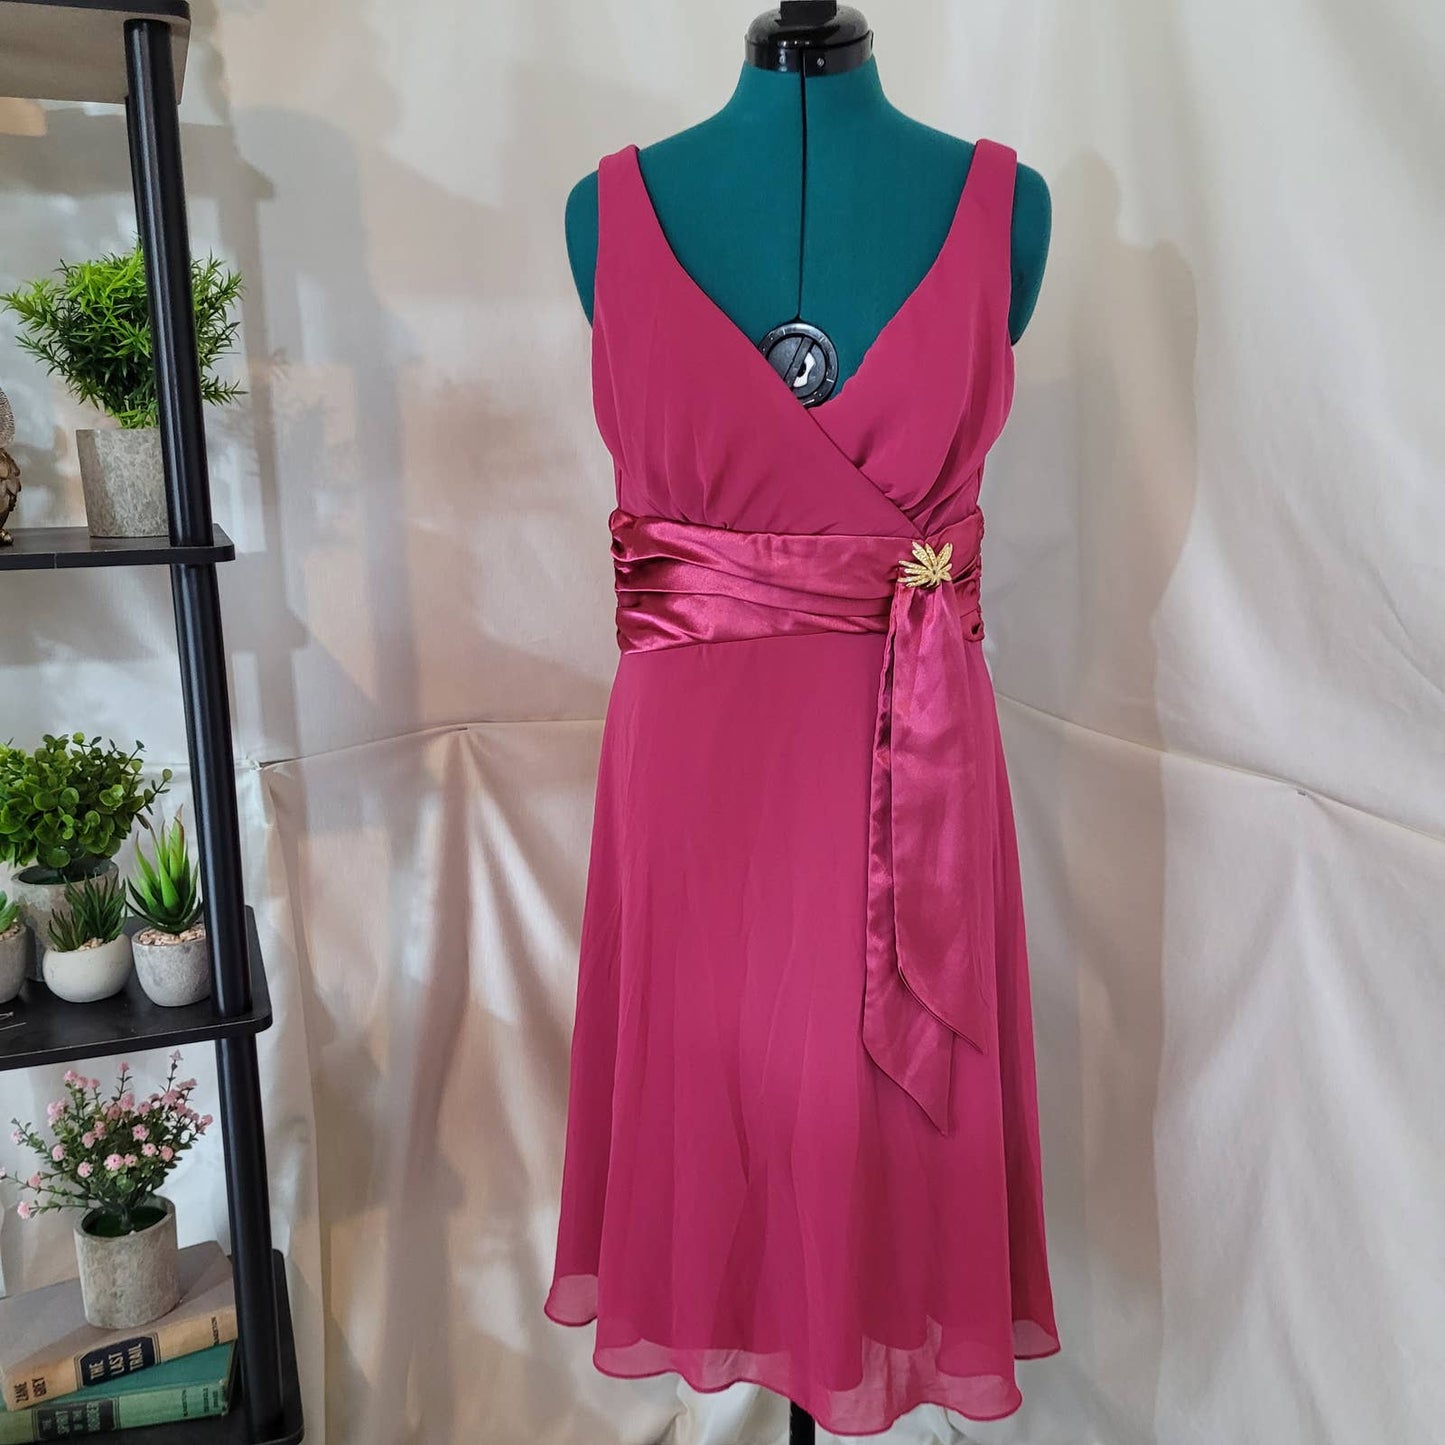 Oblique Pink Chiffon Dress with Satin Waist Tie and Gold Tone Brooch - Size 12